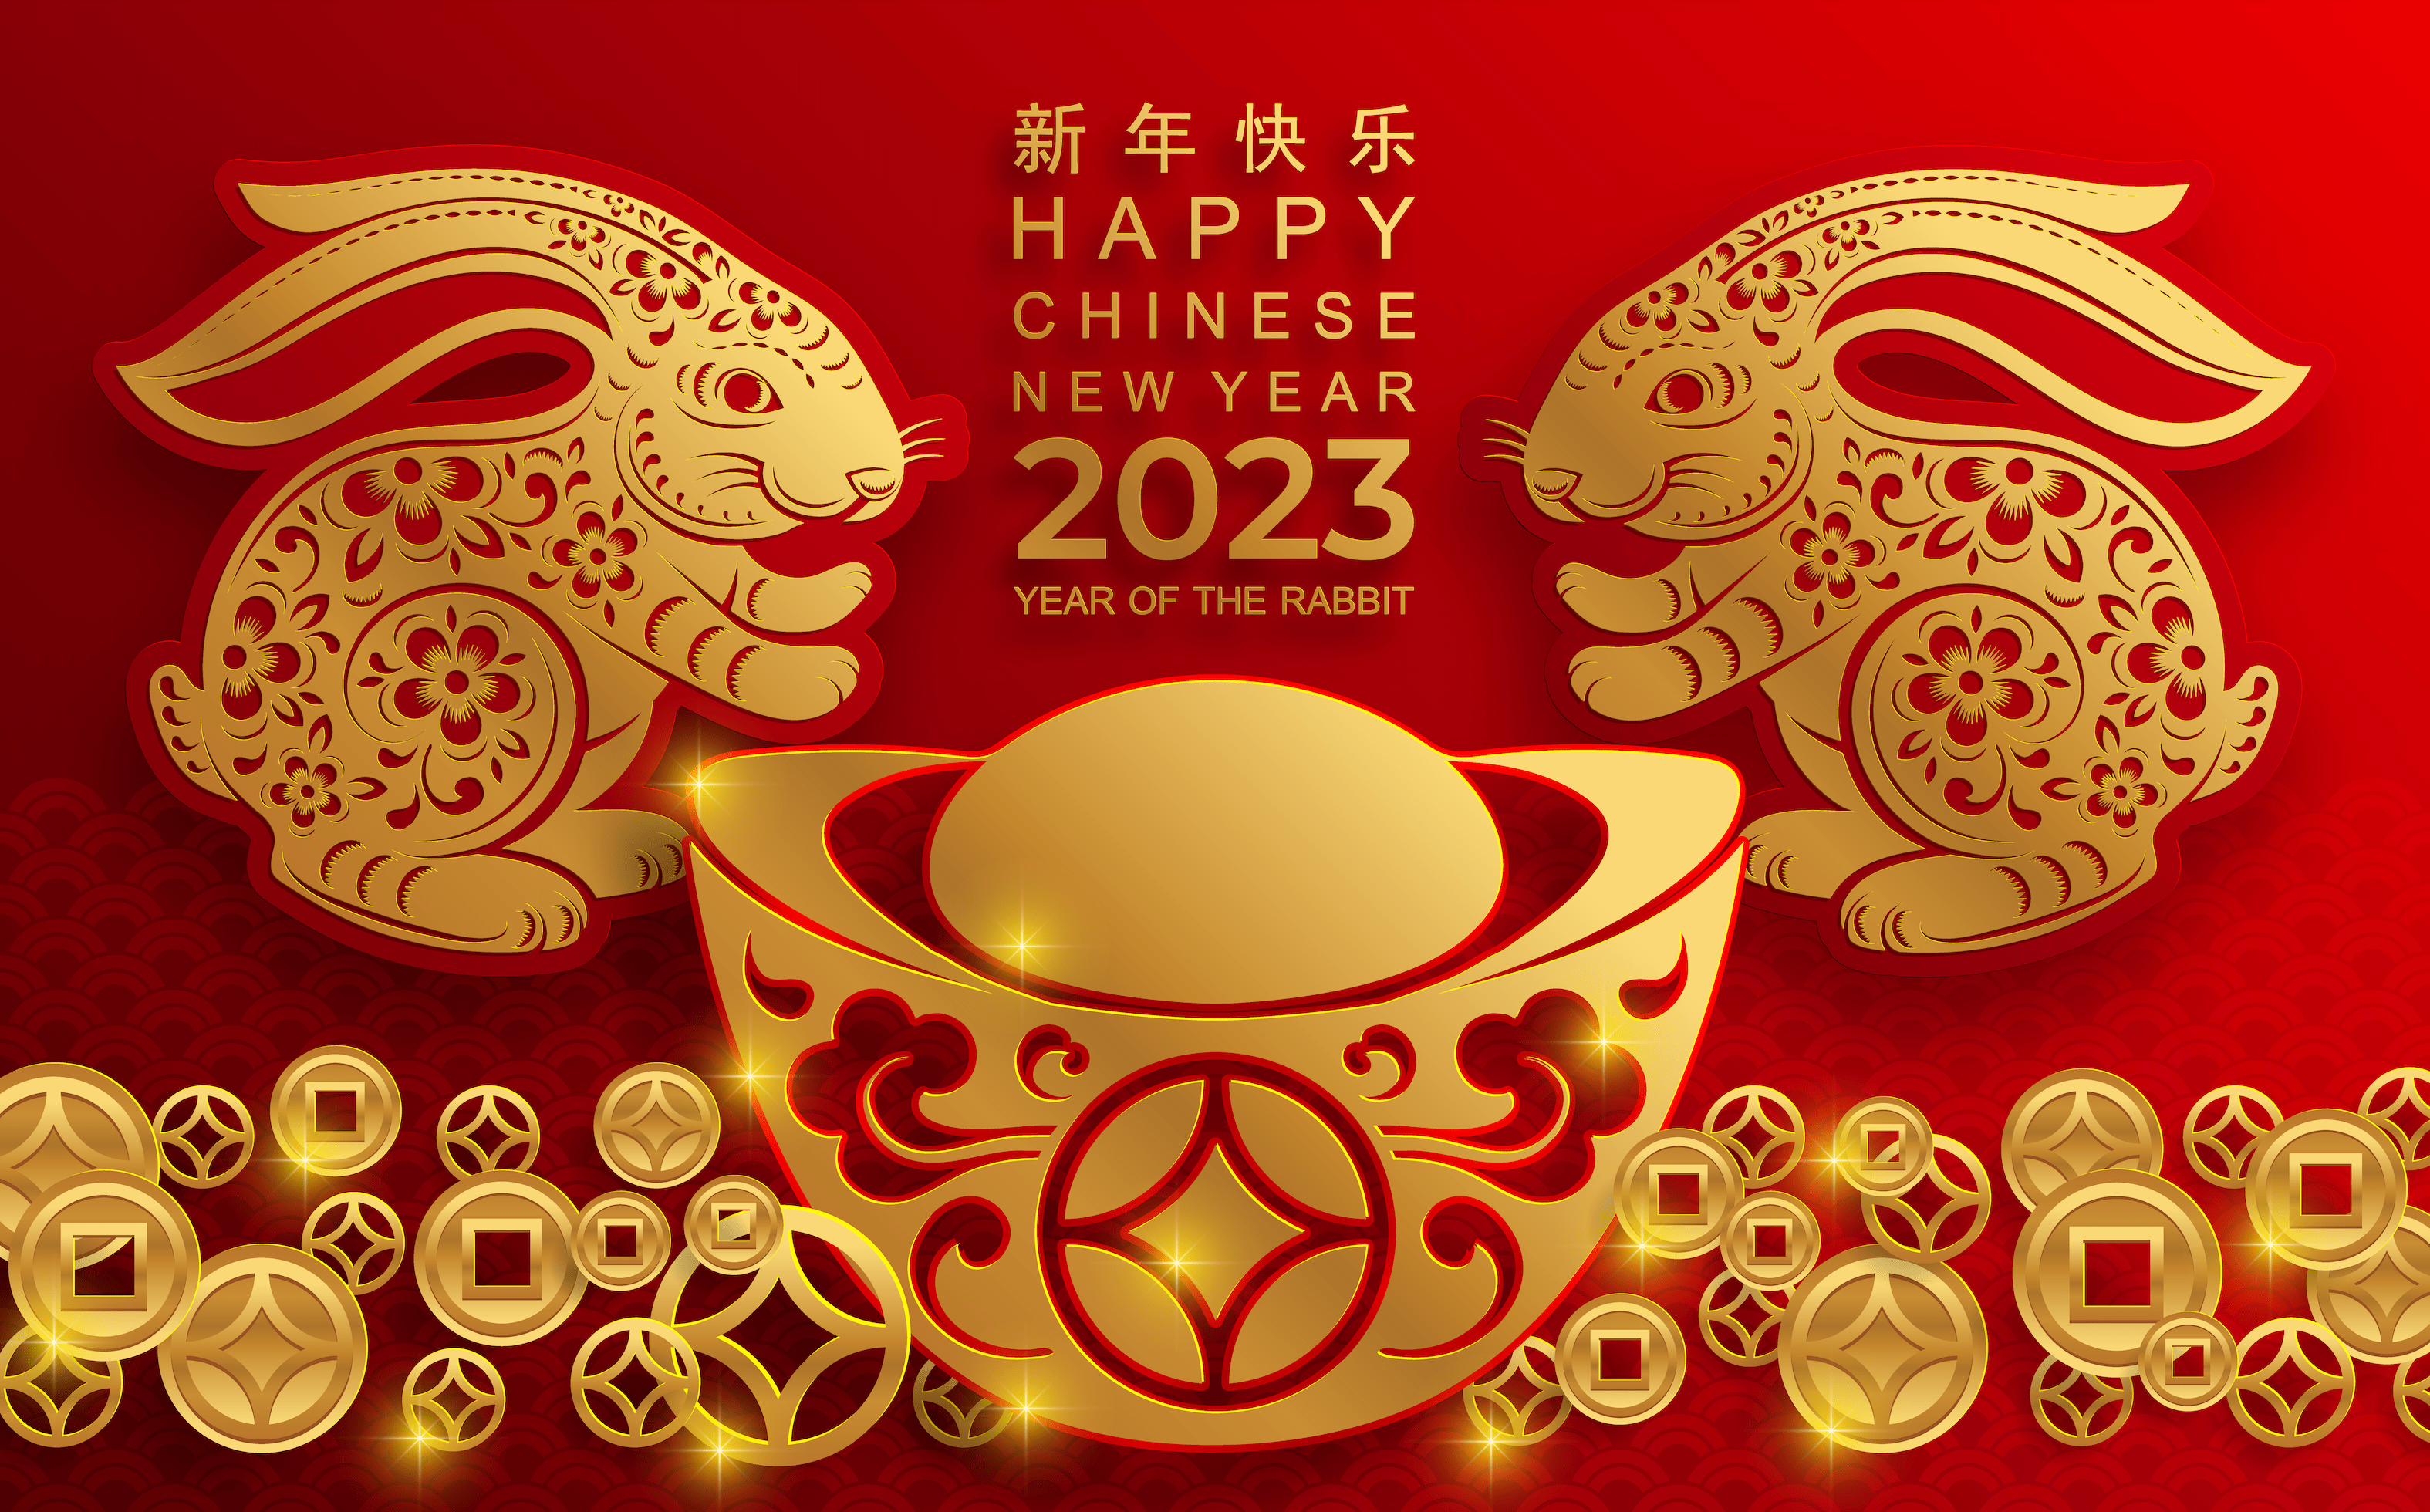 Celebration of the Year of Rabbit: Chinese New Year and Chinese Perspective on Success